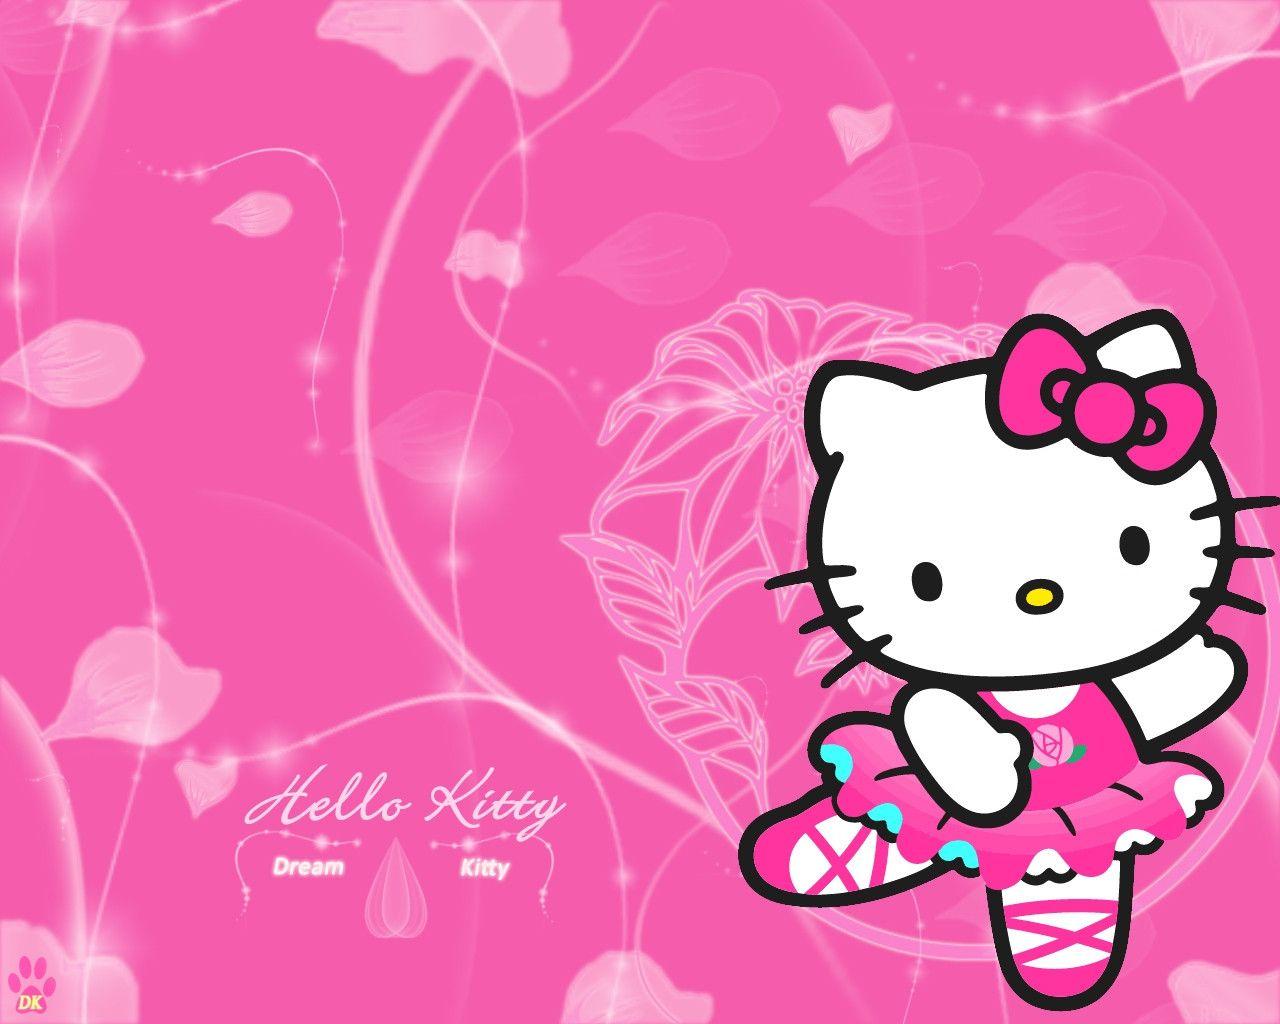 Download Hello Kitty Dream Wallpapers 1280x1024